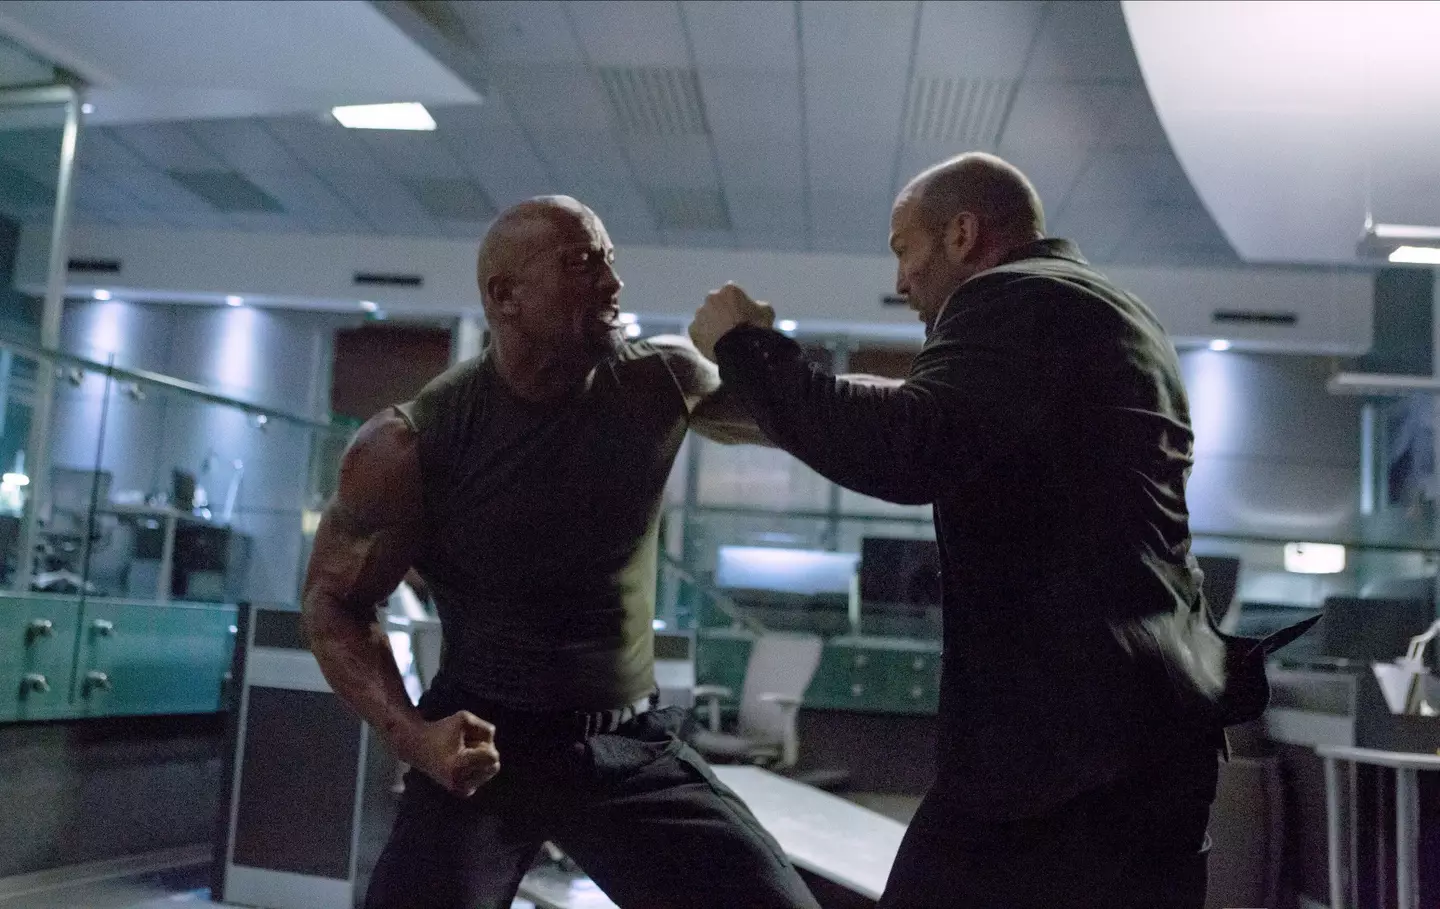 Dwayne Johnson and Jason Statham negotiated a similar clause into their contract.